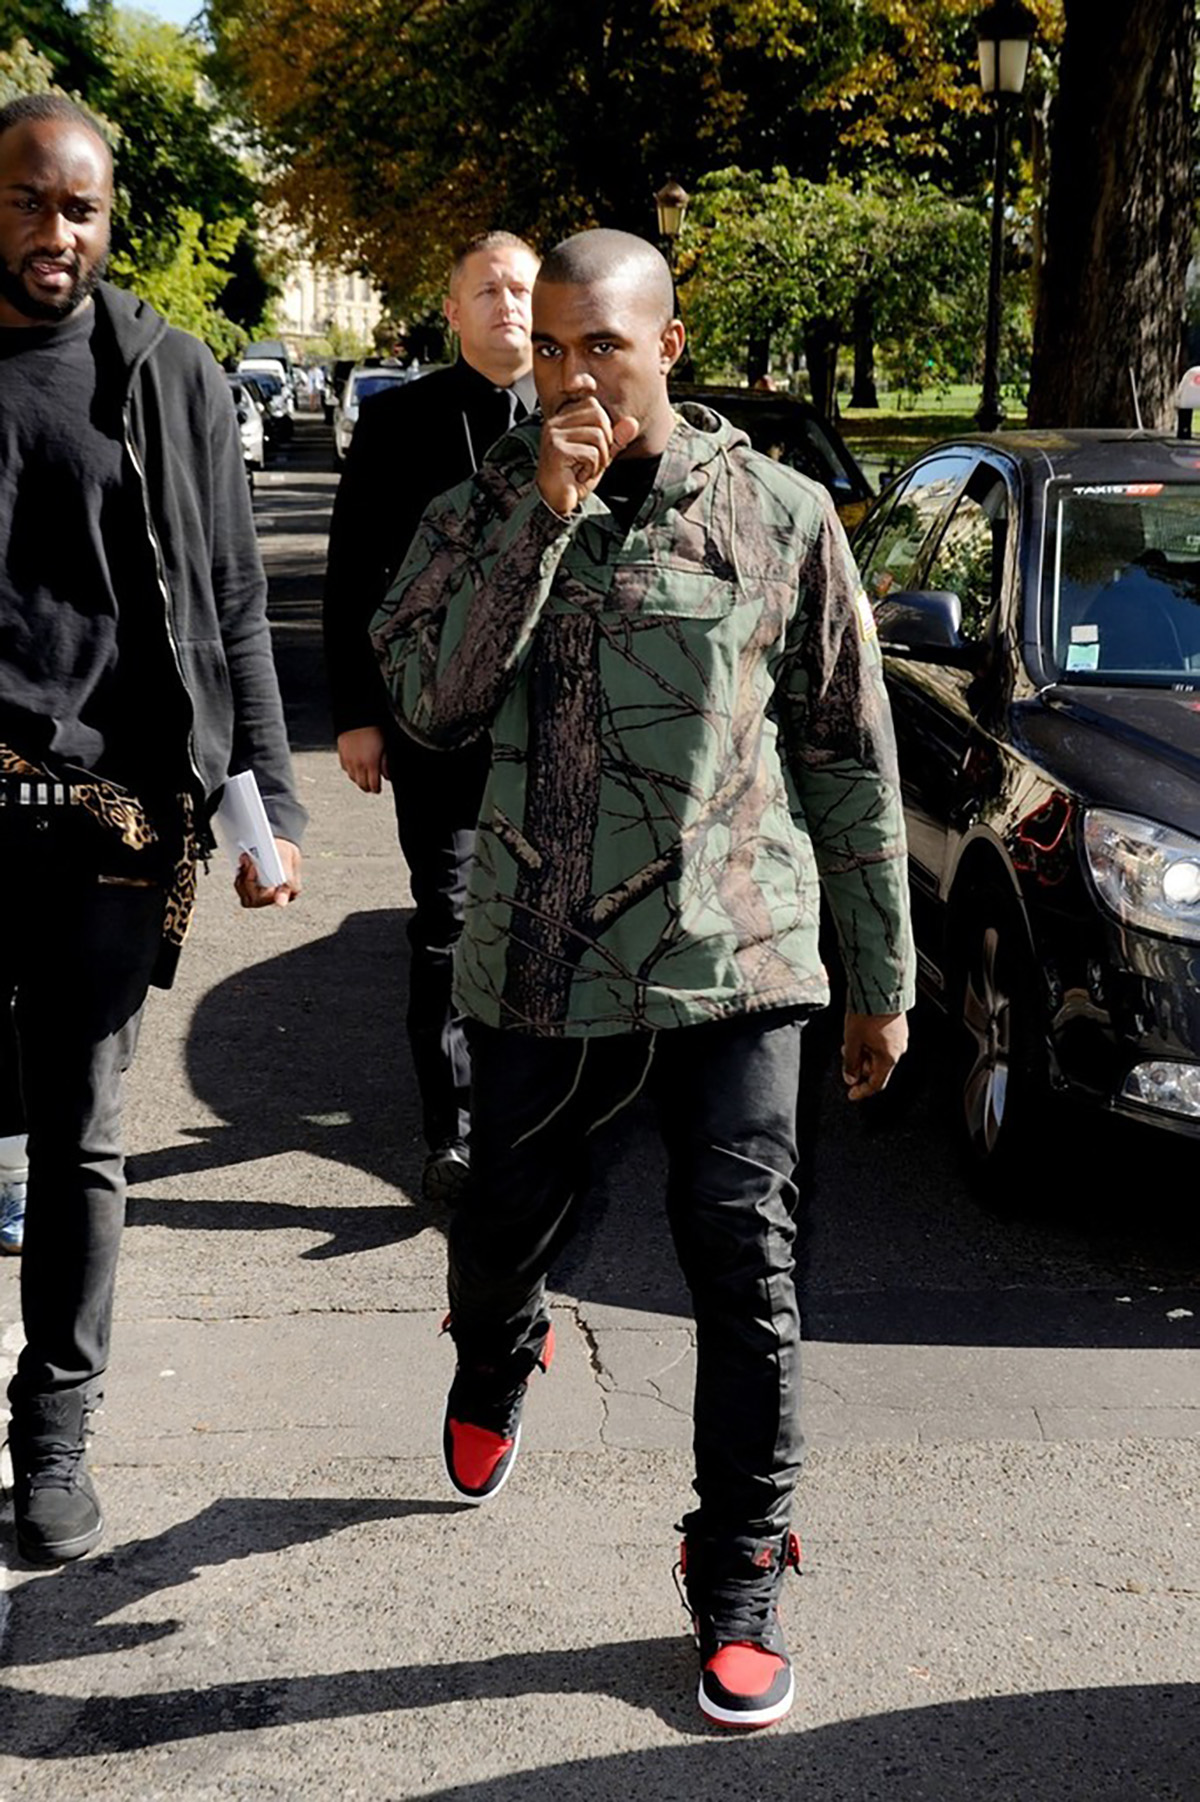 From Ato to Air Jordan to Adidas // Every Shoe Worn by Kanye | Nice Kicks